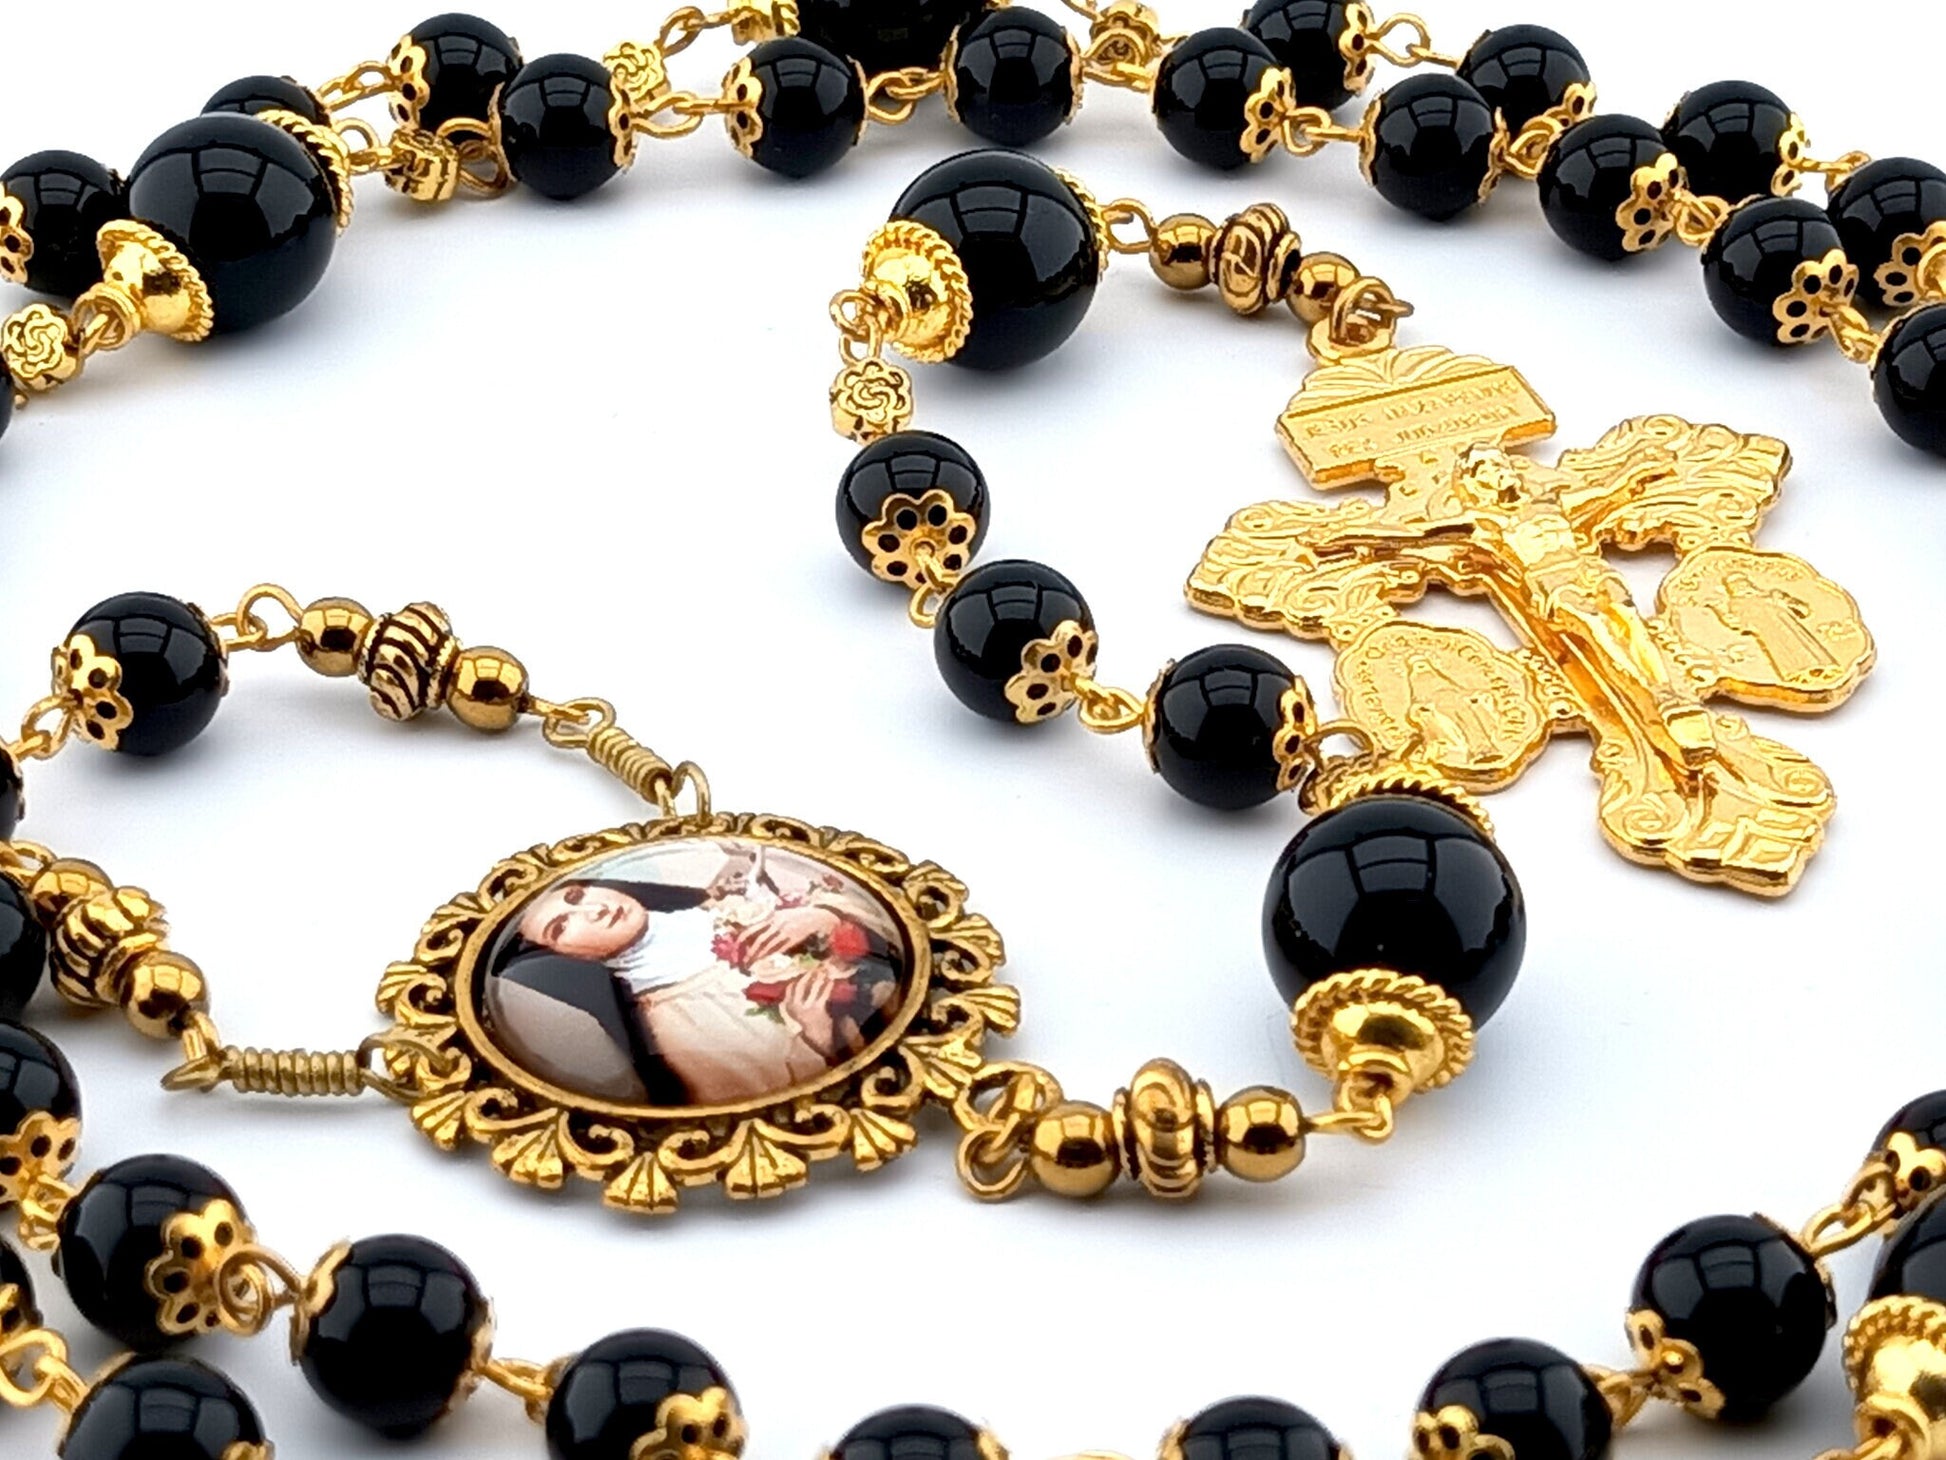 Saint Therese of Lisieux unique rosary beads with onyx beads, gold pardon crucifix, picture centre medal, bead caps and wire.